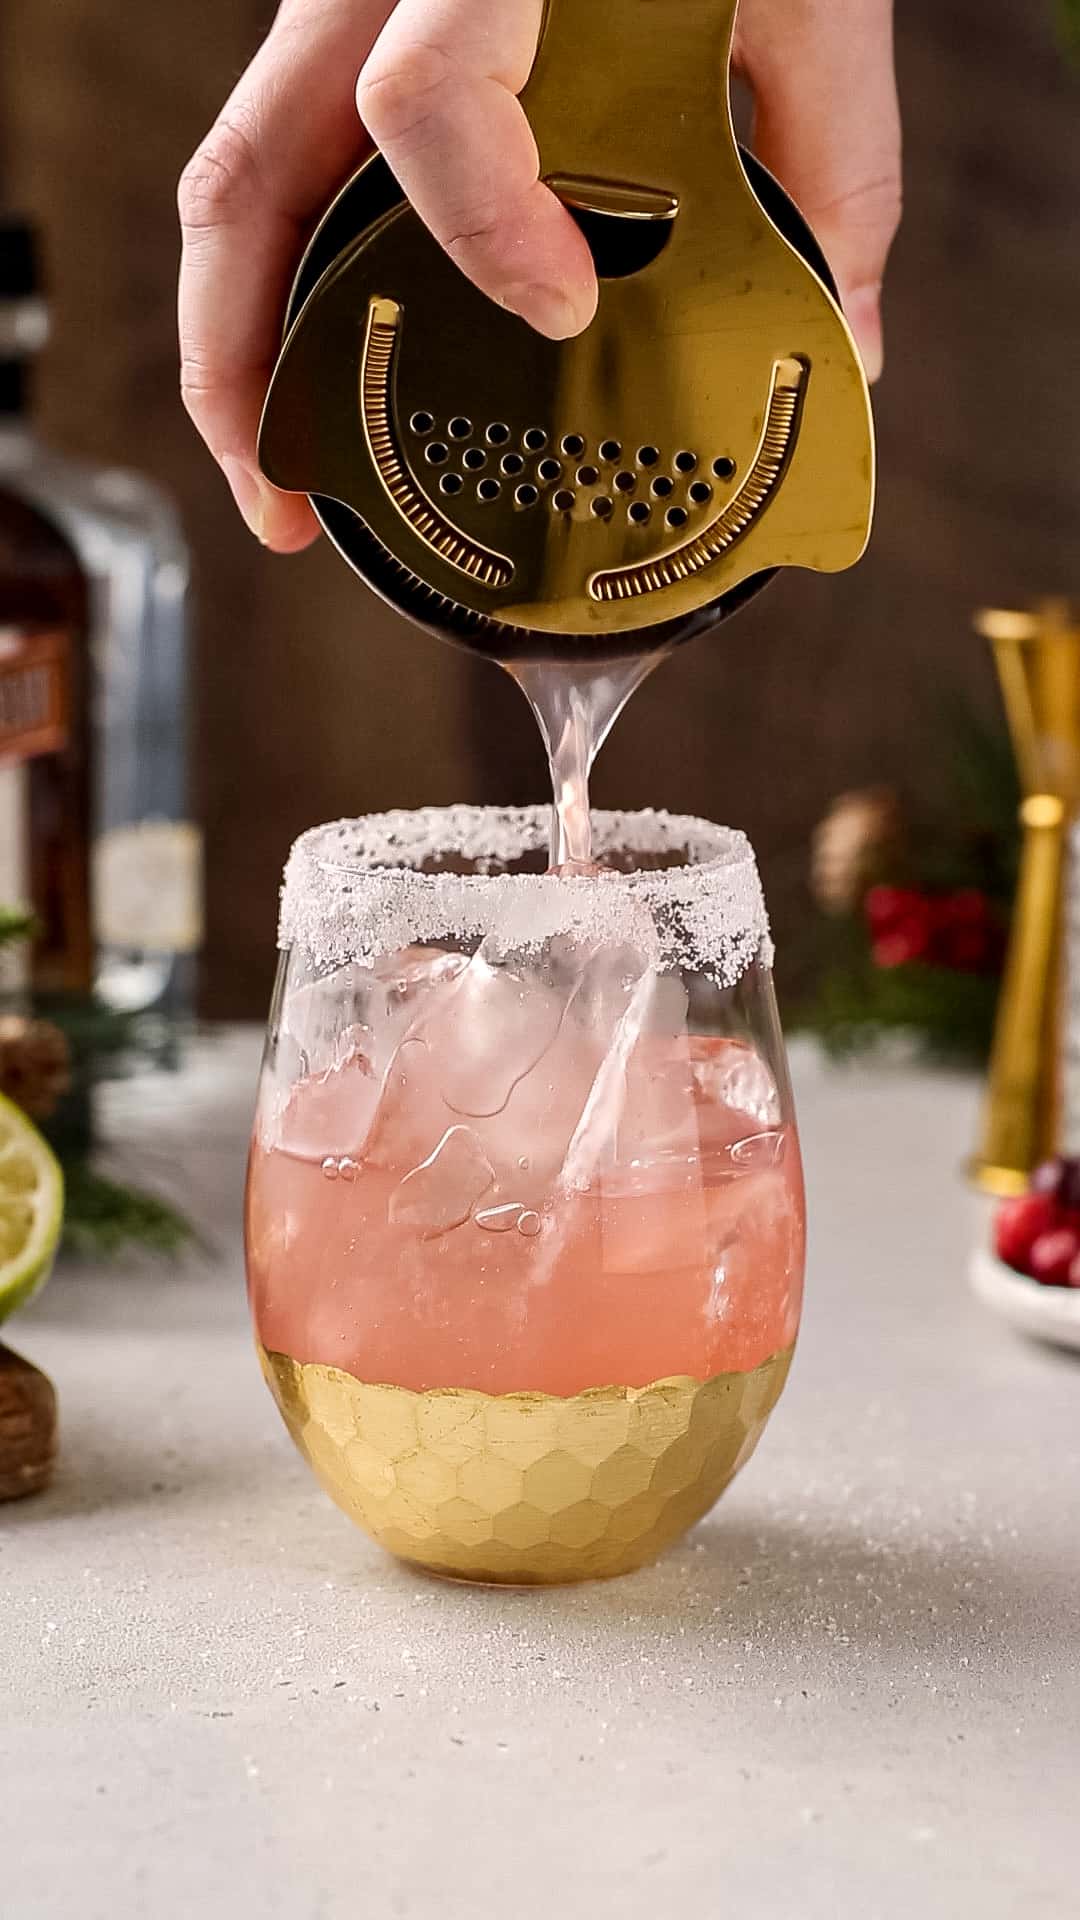 Hand straining a red-colored cocktail into an ice-filled, salt-rimmed glass.